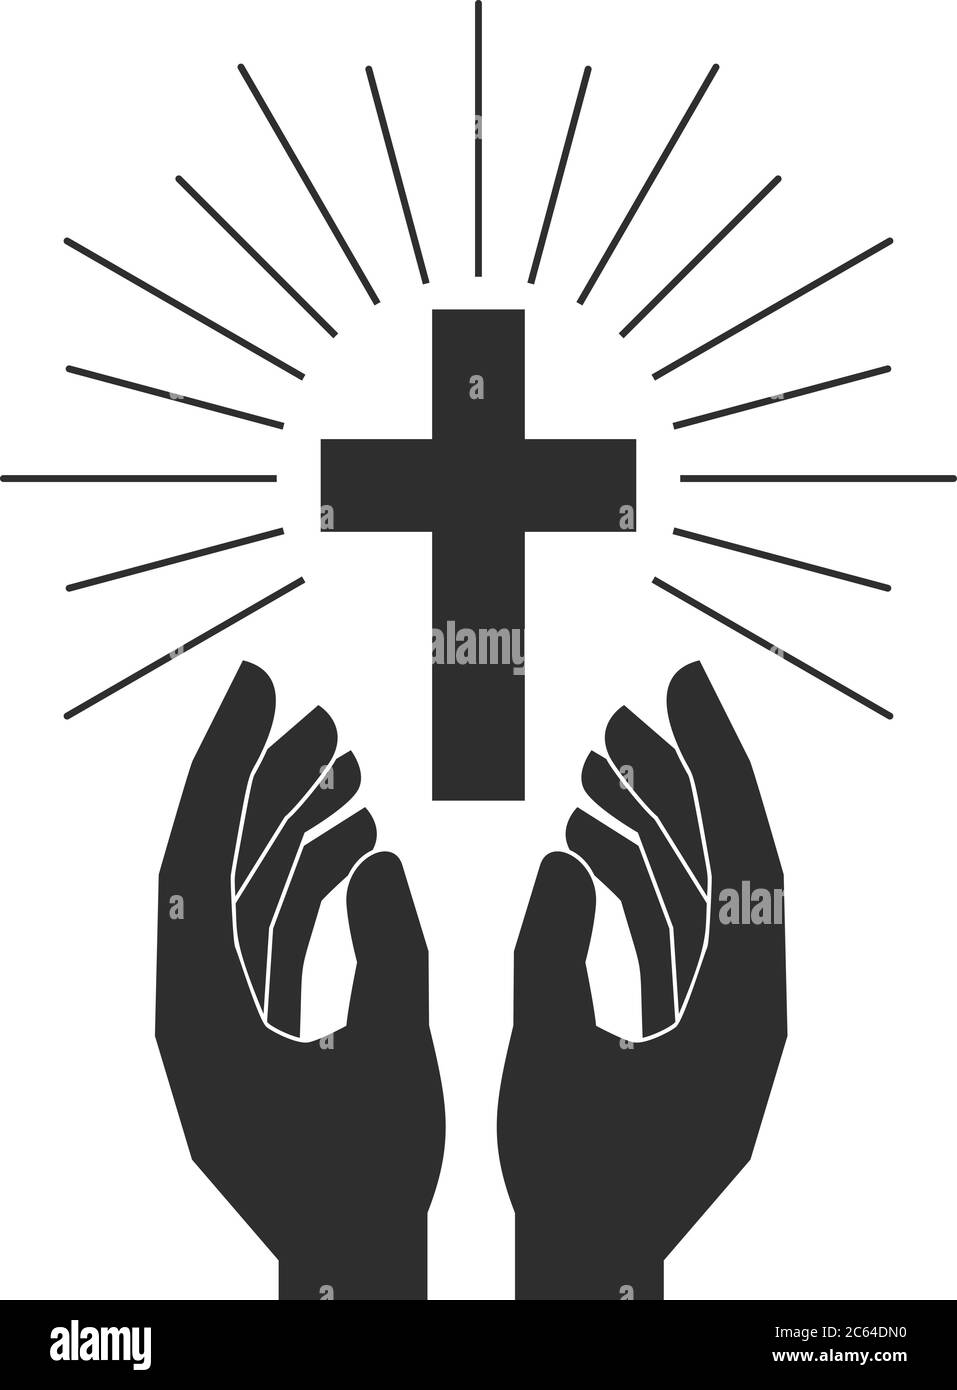 Hands with shining holy cross. Design element for logo, label ...